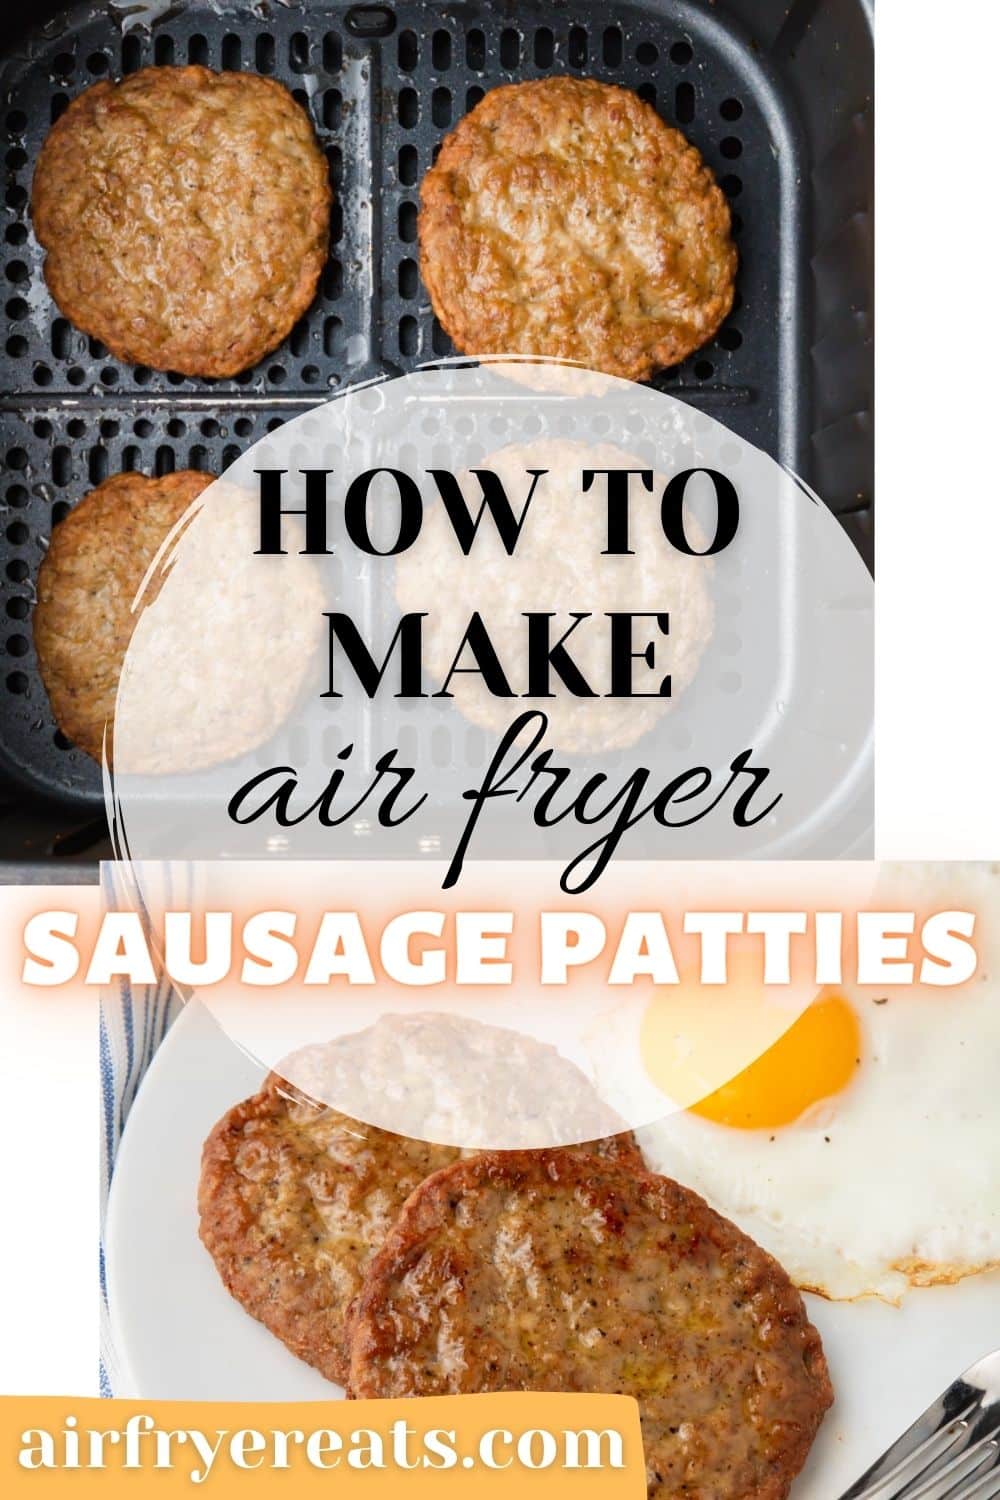 Frozen sausage patties cook up quickly and easily in the air fryer. Air fryer sausage patties are a perfect part of a hearty, delicious breakfast. #airfryer #breakfast #sausage via @vegetarianmamma